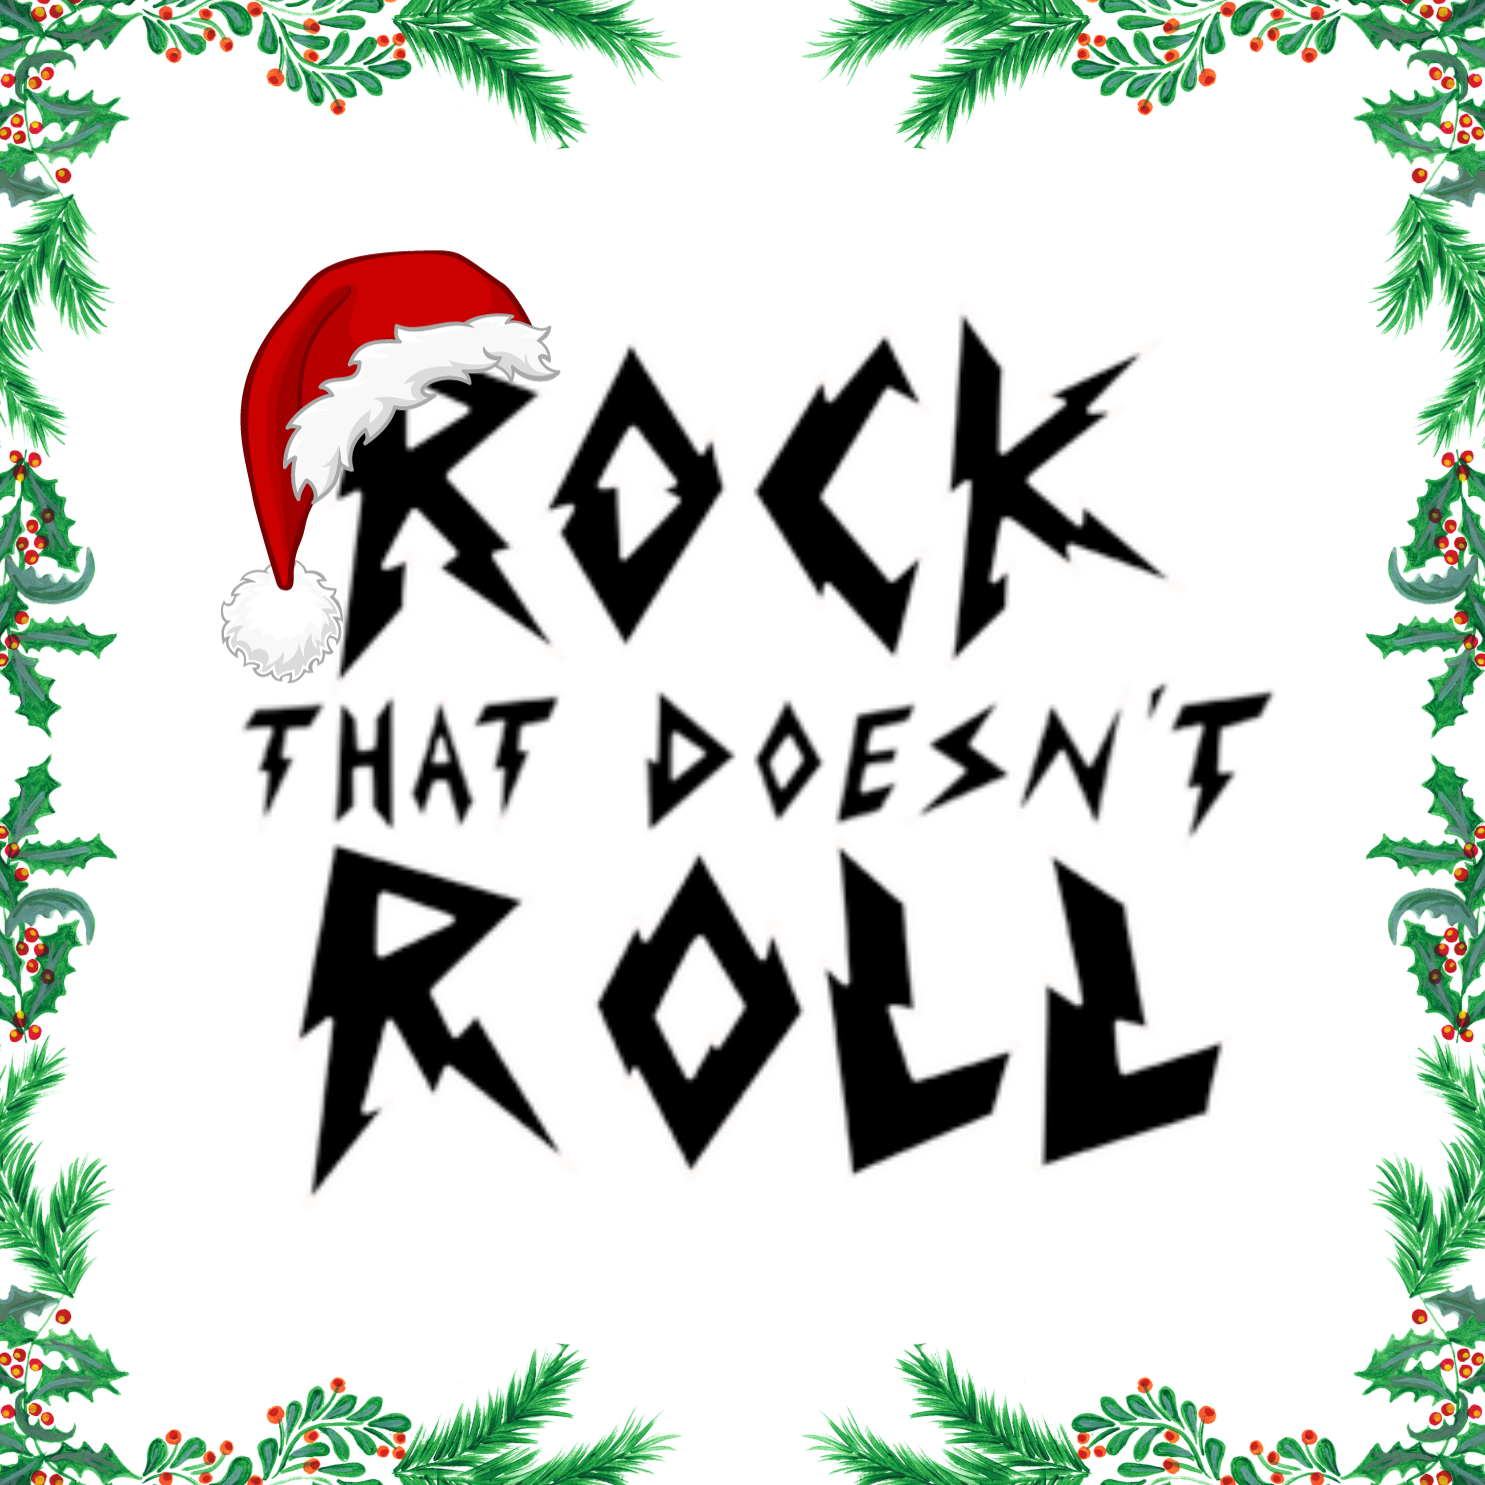 It’s Christmastime! CCM Christmas Music Awards from Rock That Doesn’t Roll